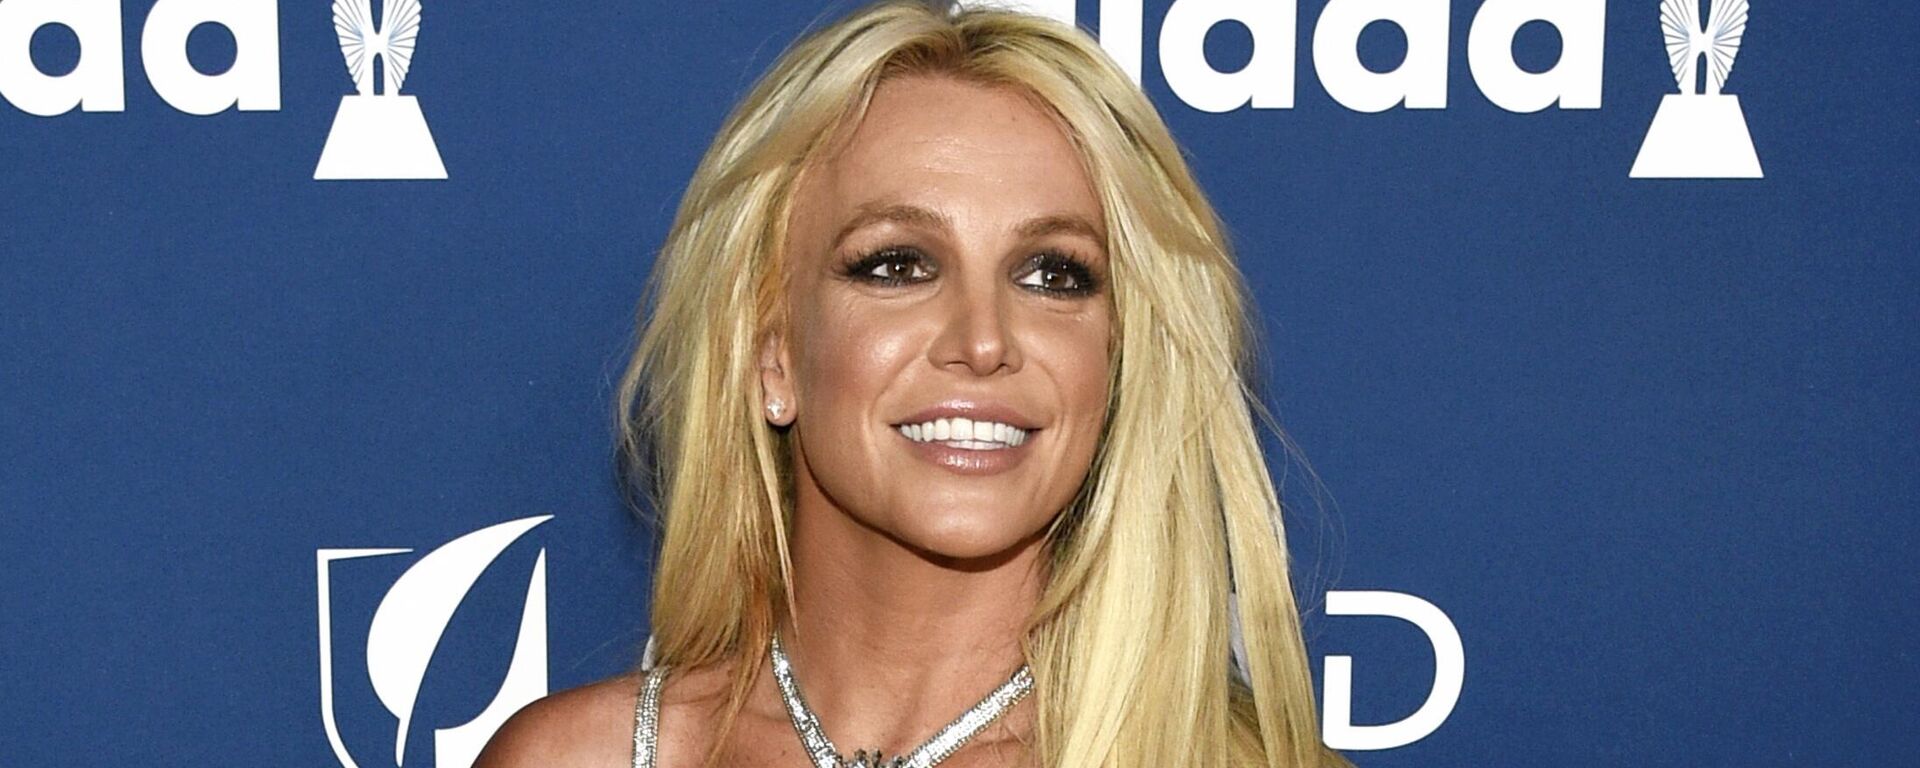 FILE - Britney Spears appears at the 29th annual GLAAD Media Awards in Beverly Hills, Calif., on April 12, 2018 - Sputnik International, 1920, 01.06.2022